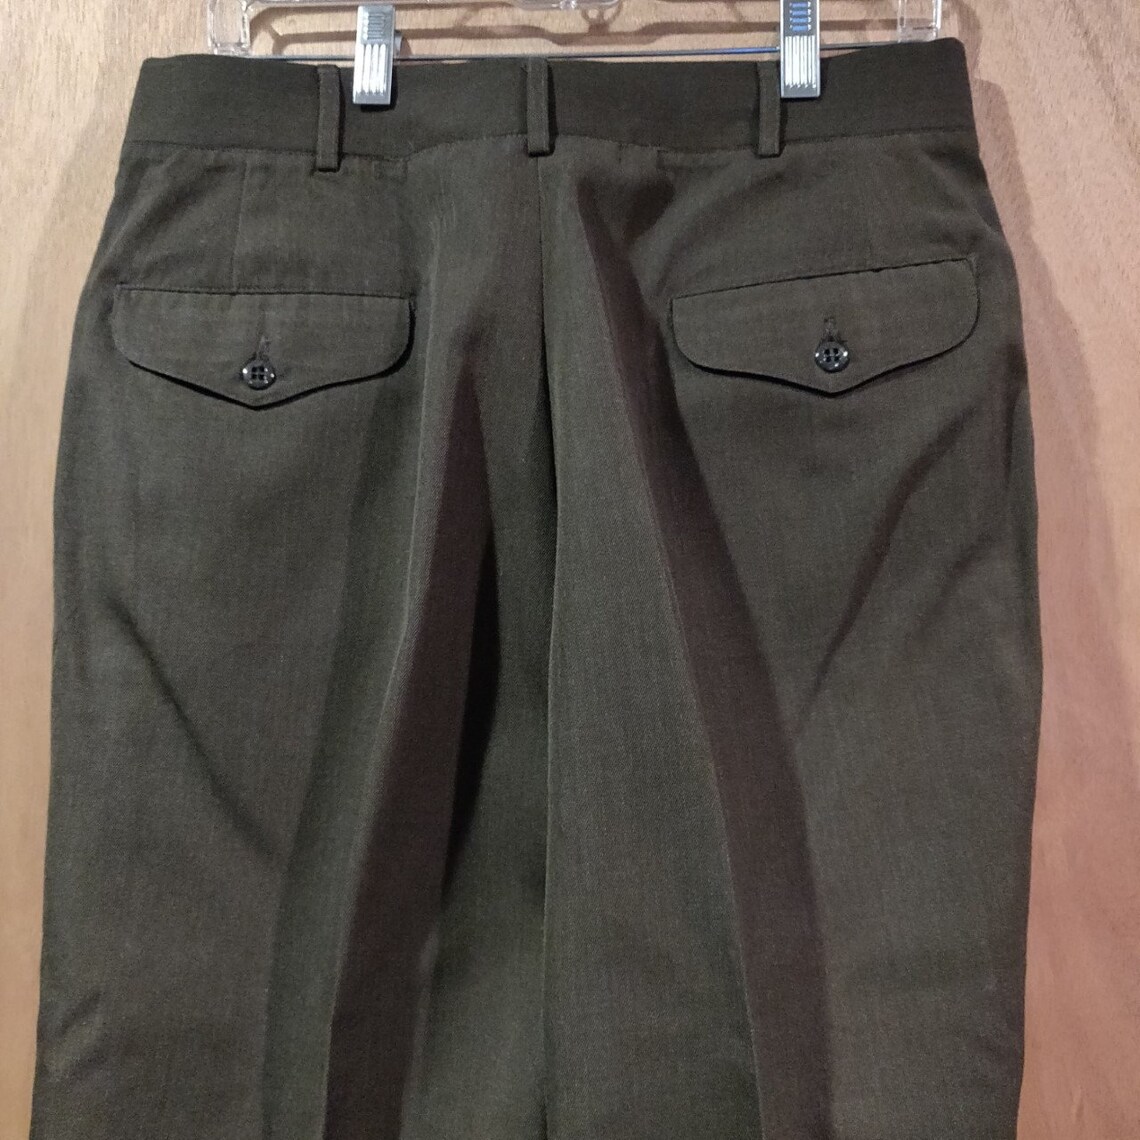 ARMY MILITARY PANTS - Etsy